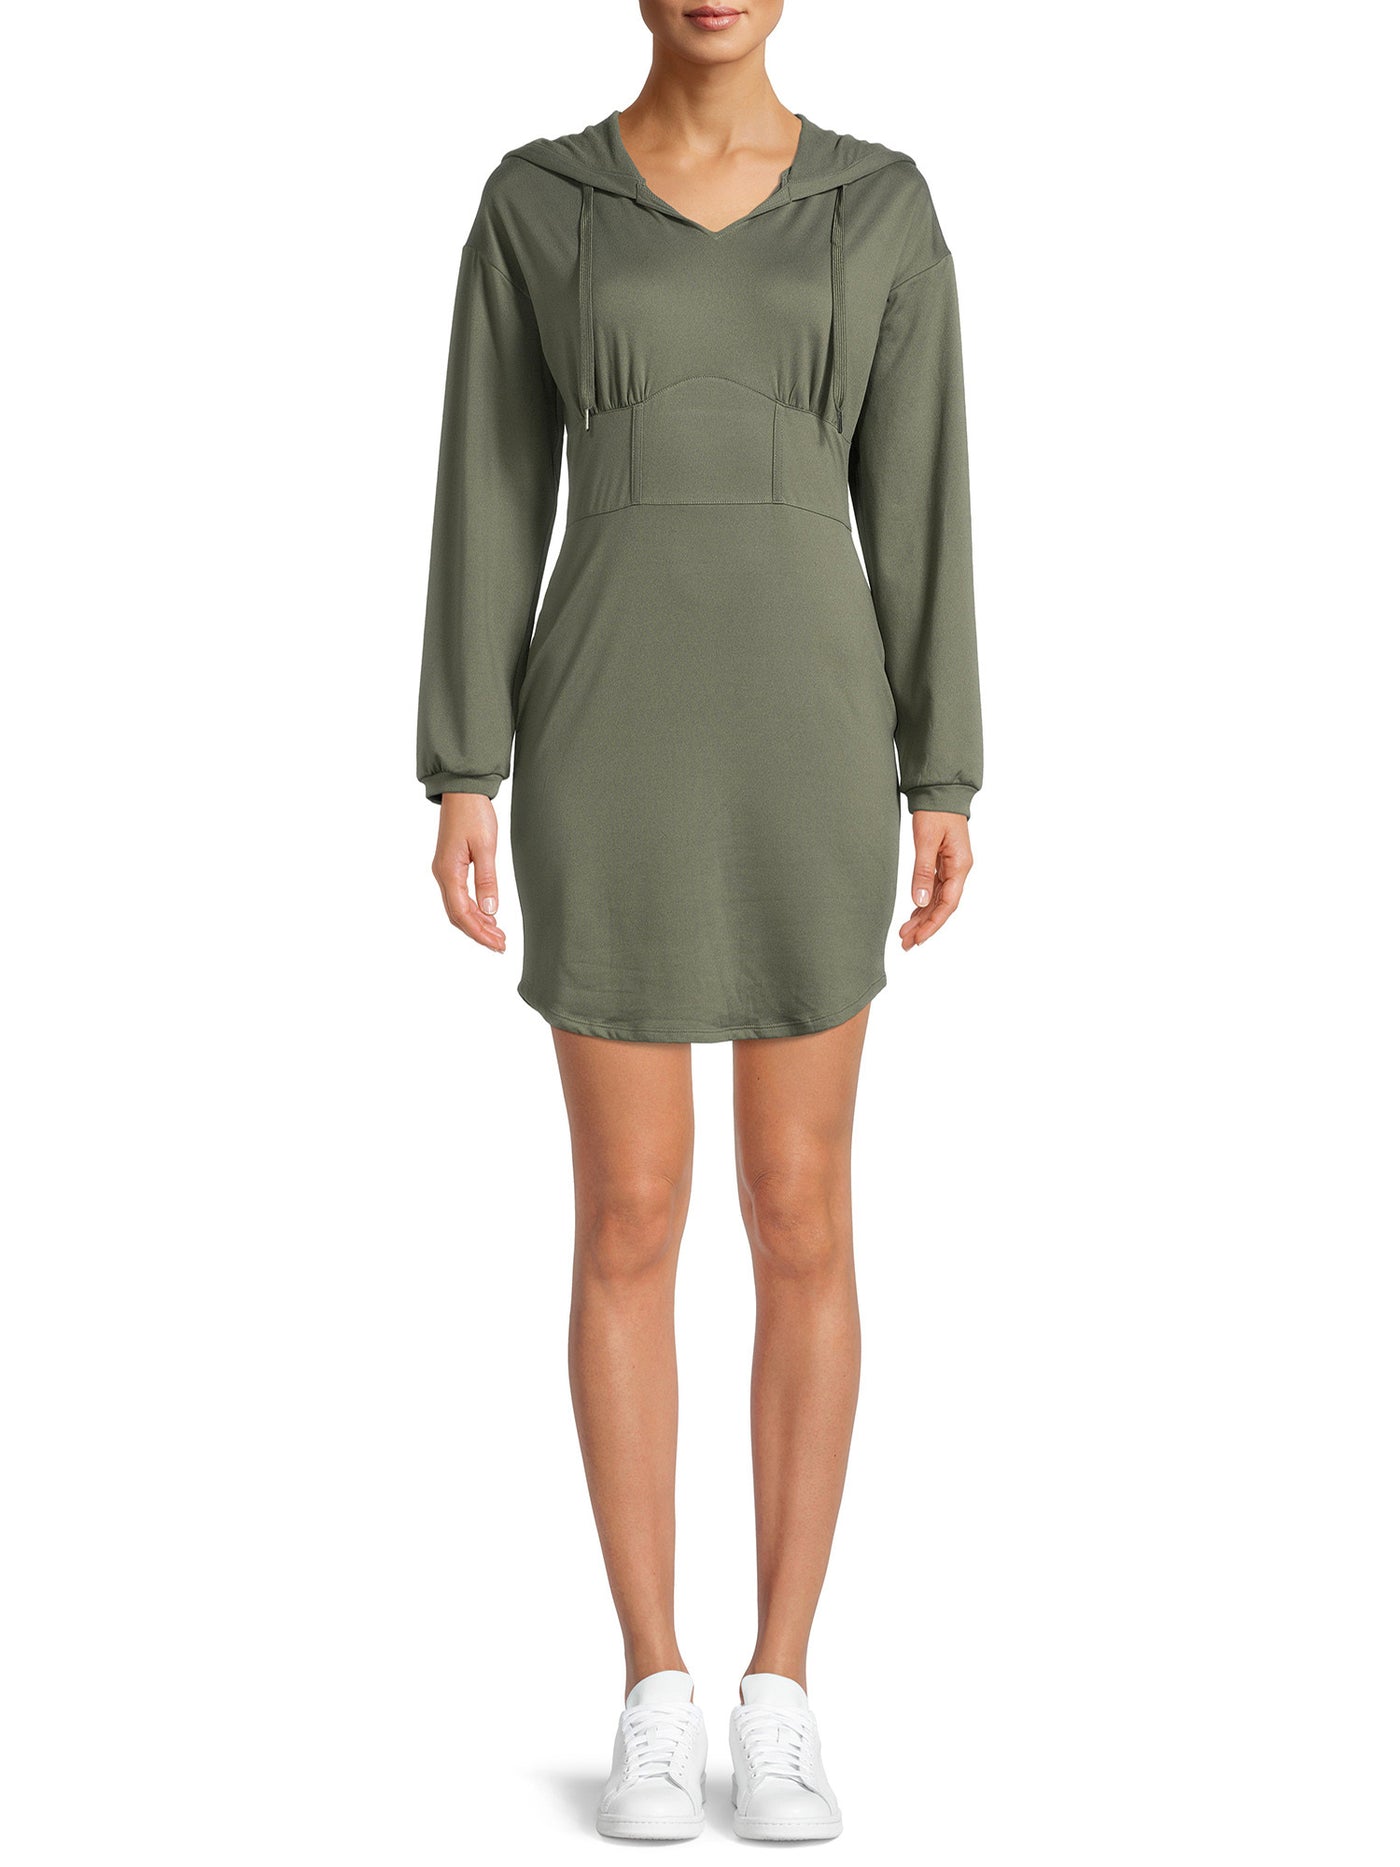 ALMOST FAMOUS Womens Green Stretch Fitted Pleated Hooded Long Sleeve Short Sheath Dress Juniors L